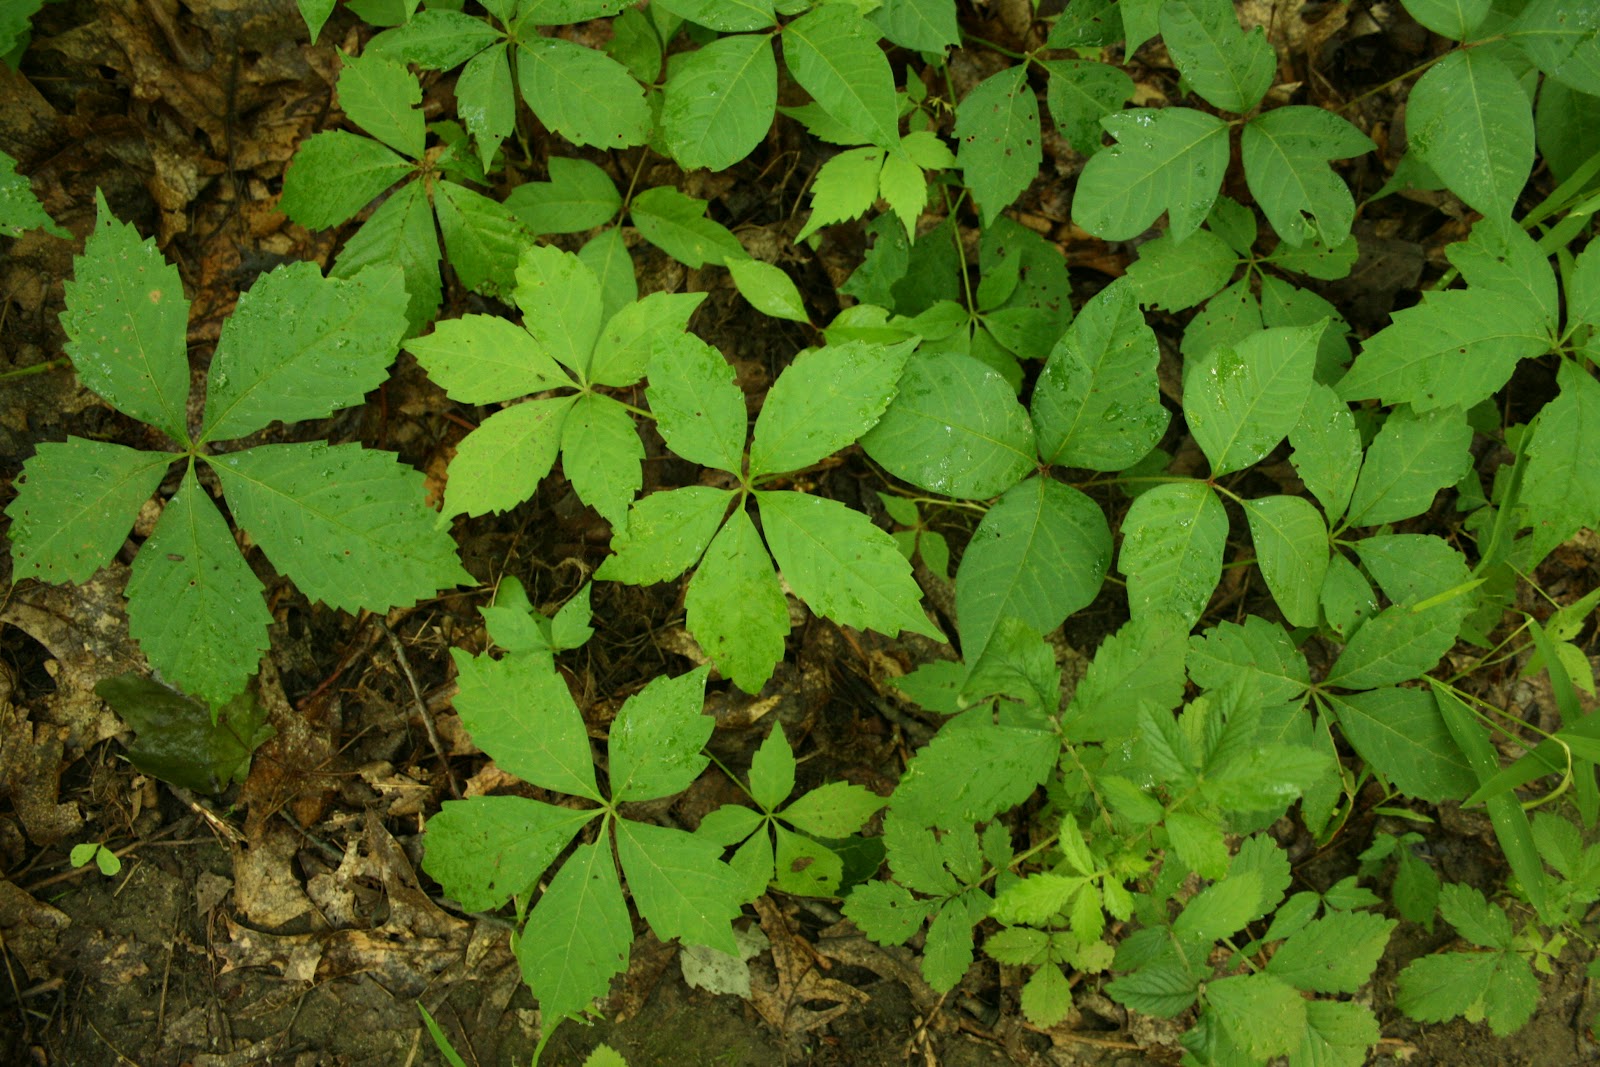 Poison Ivy Pictures, Images & Photos | Photobucket